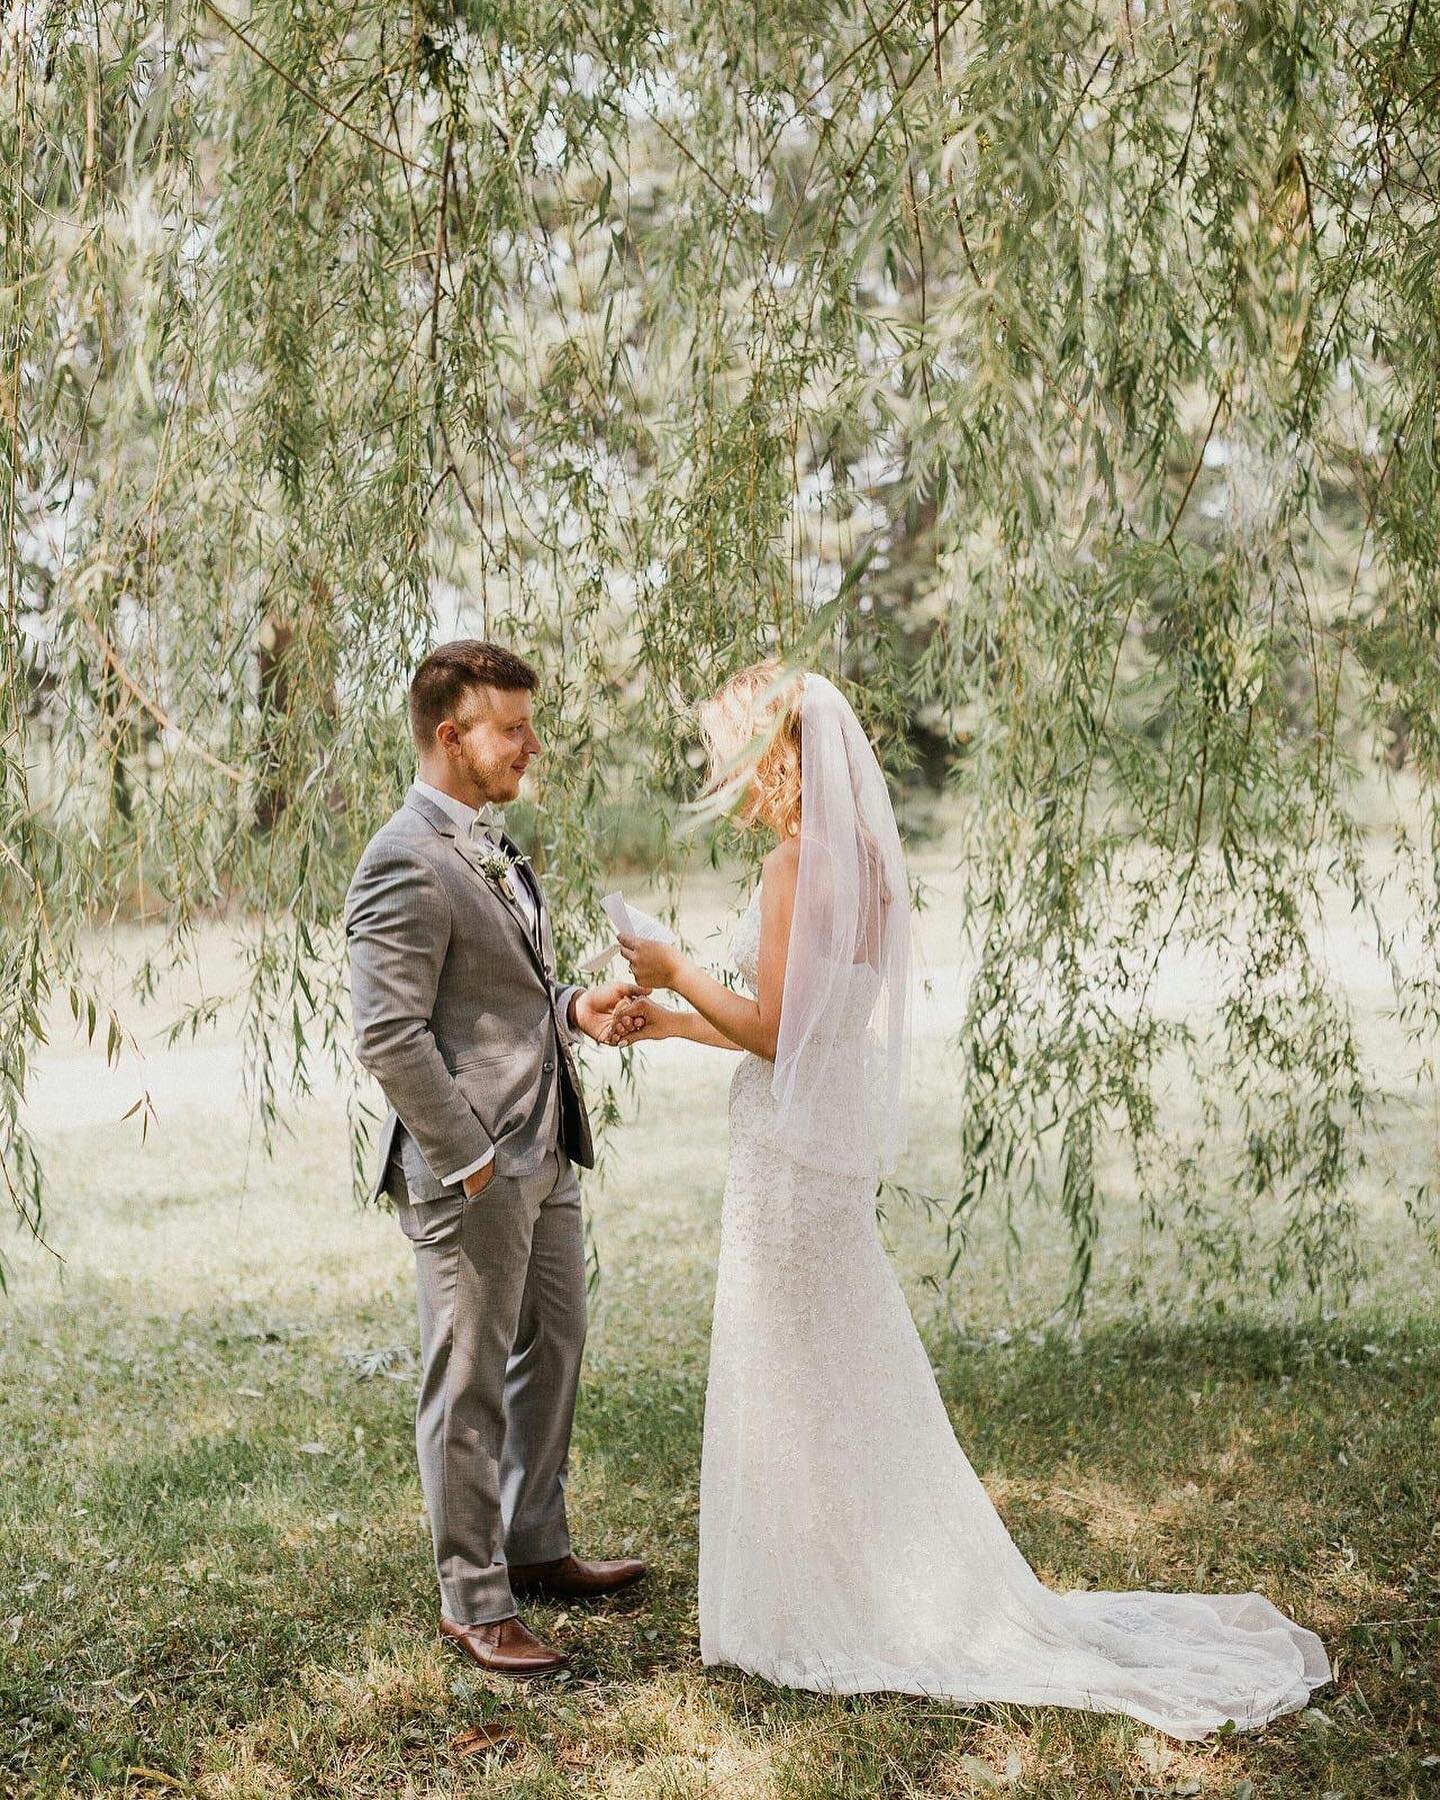 POV: Beautiful couple, on a beautiful day, at a beautiful venue - what else do you need?! 😍
 
📸 @haleypeterson_photos